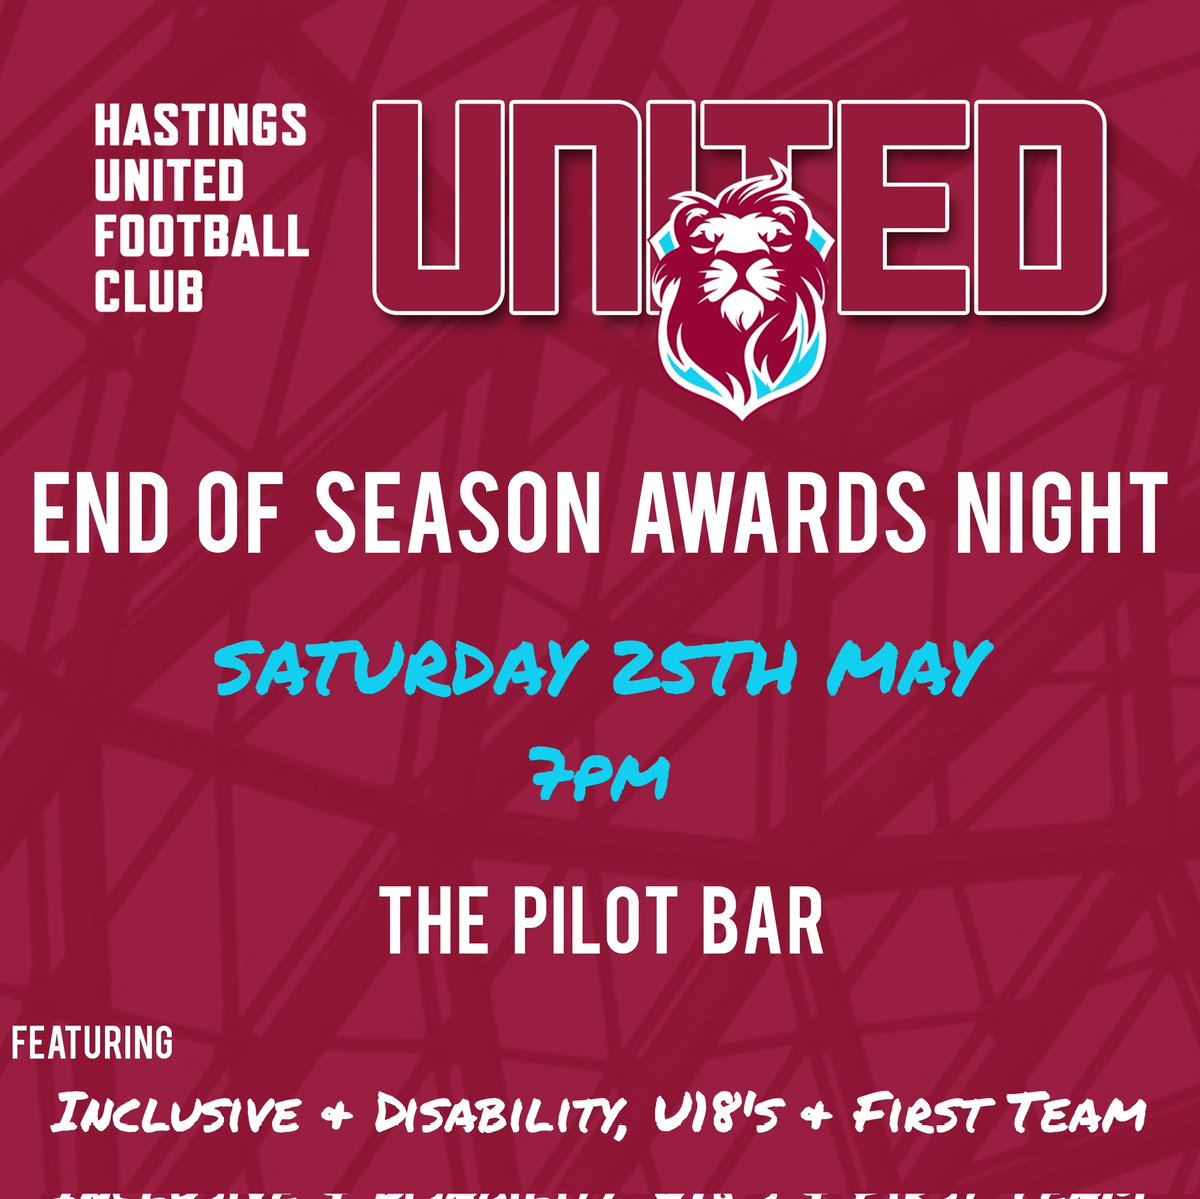 𝗘𝗡𝗗 𝗢𝗙 𝗦𝗘𝗔𝗦𝗢𝗡 𝗔𝗪𝗔𝗥𝗗𝗦 𝗡𝗜𝗚𝗛𝗧 Inclusive & Disability, Under 18's and First Team Saturday 25th May 7pm The Pilot Bar #COYU #AwardsNight #HUFC